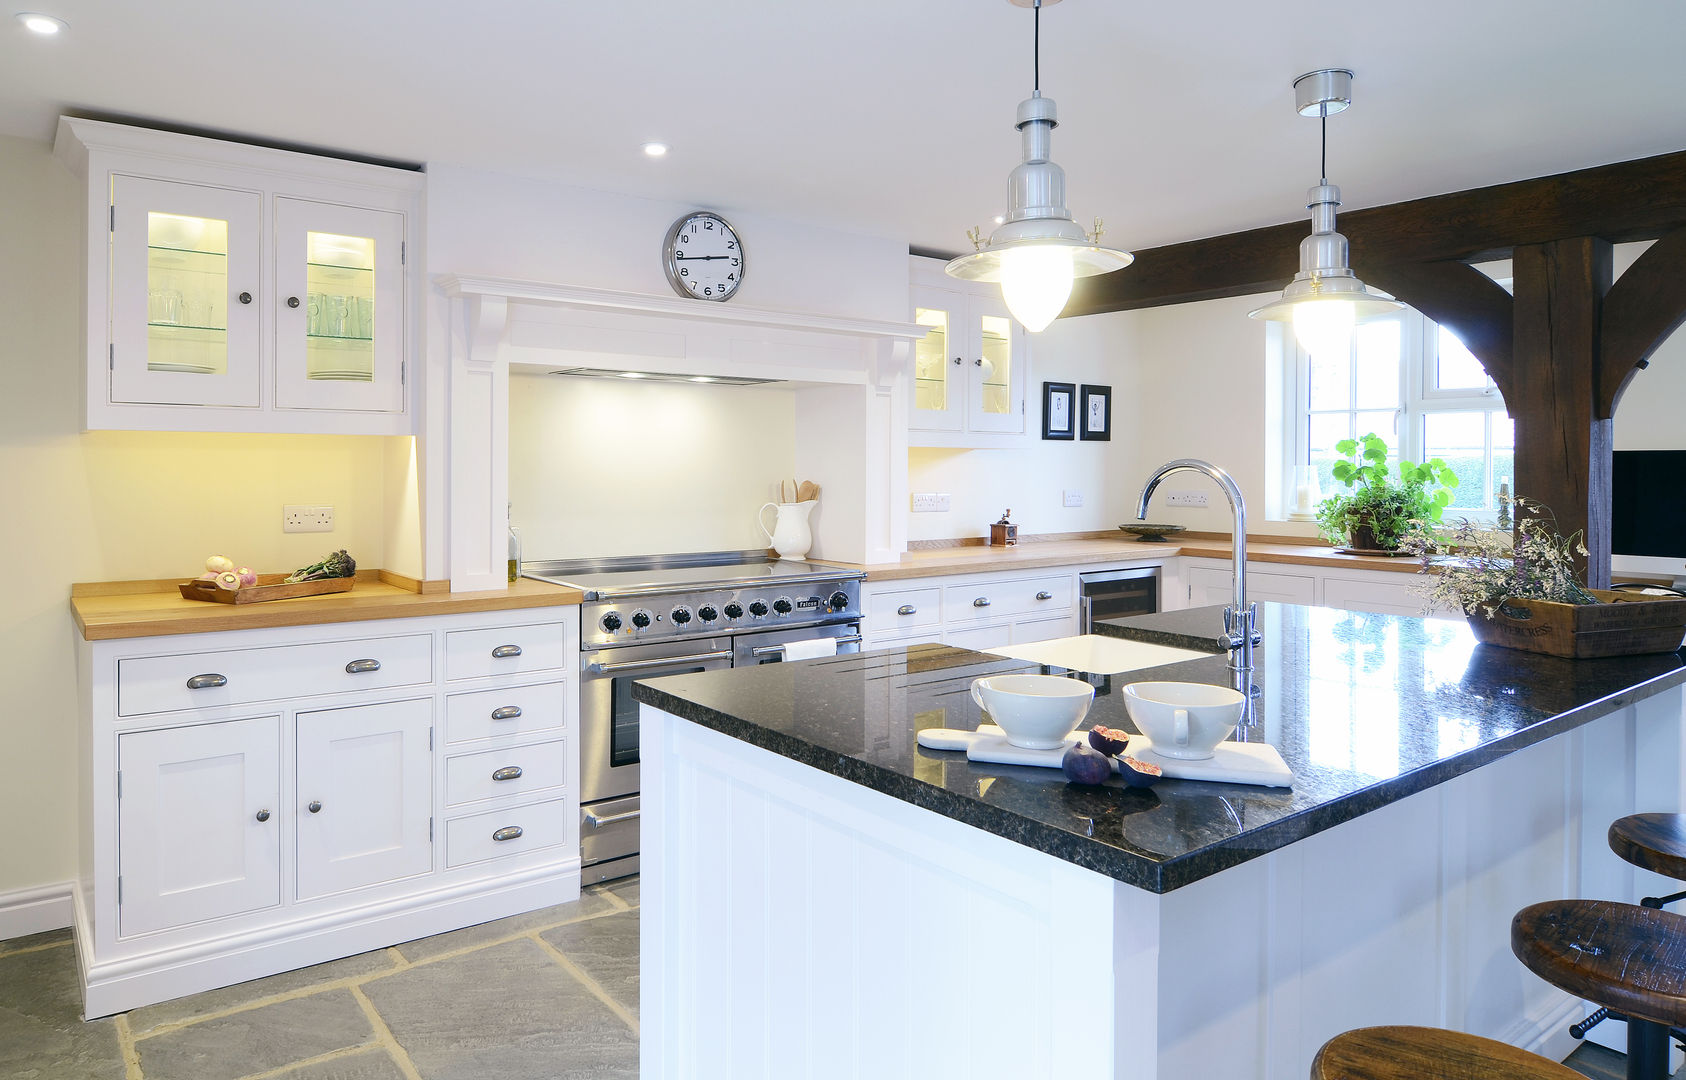 Our Classic Range kitchen in a Sussex Barn Home homify Cozinhas clássicas